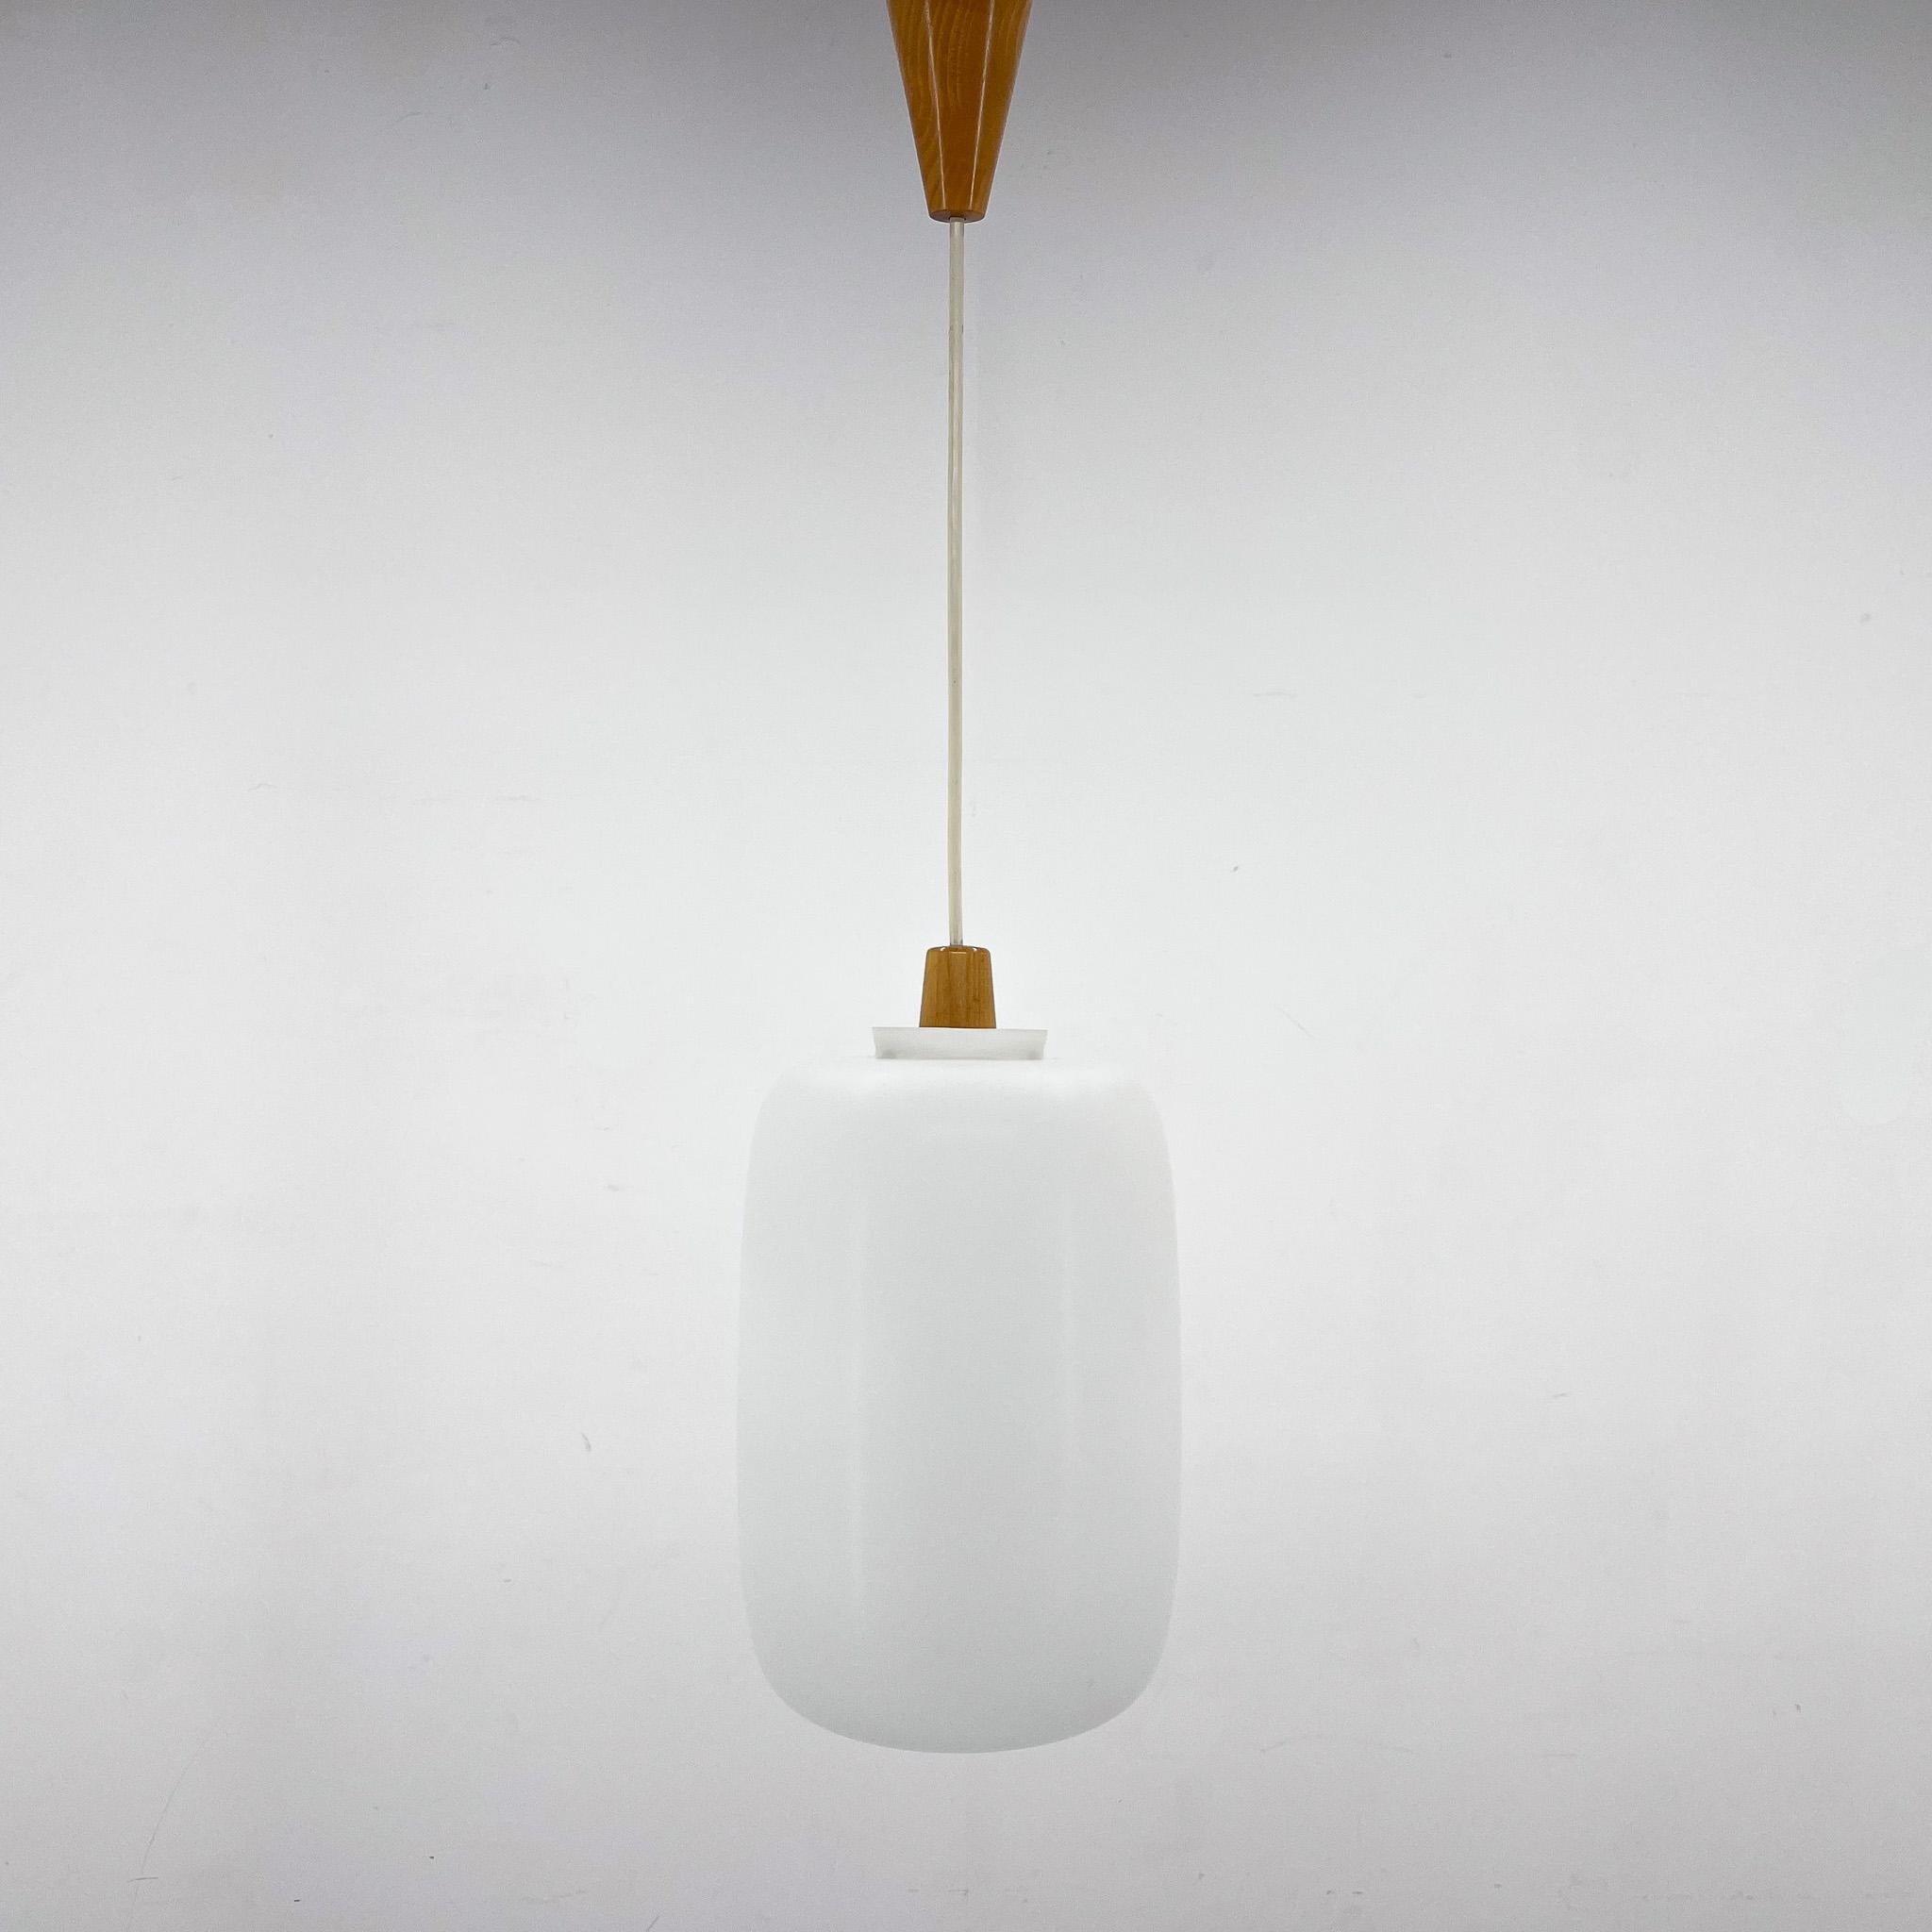 Elegant midcentury pendant light by ULUV made from wood and milk glass. Produced in former Czechoslovakia in the 1960s. Good vintage condition. 
1x  E25-E27 sockets. US wiring compatible. 